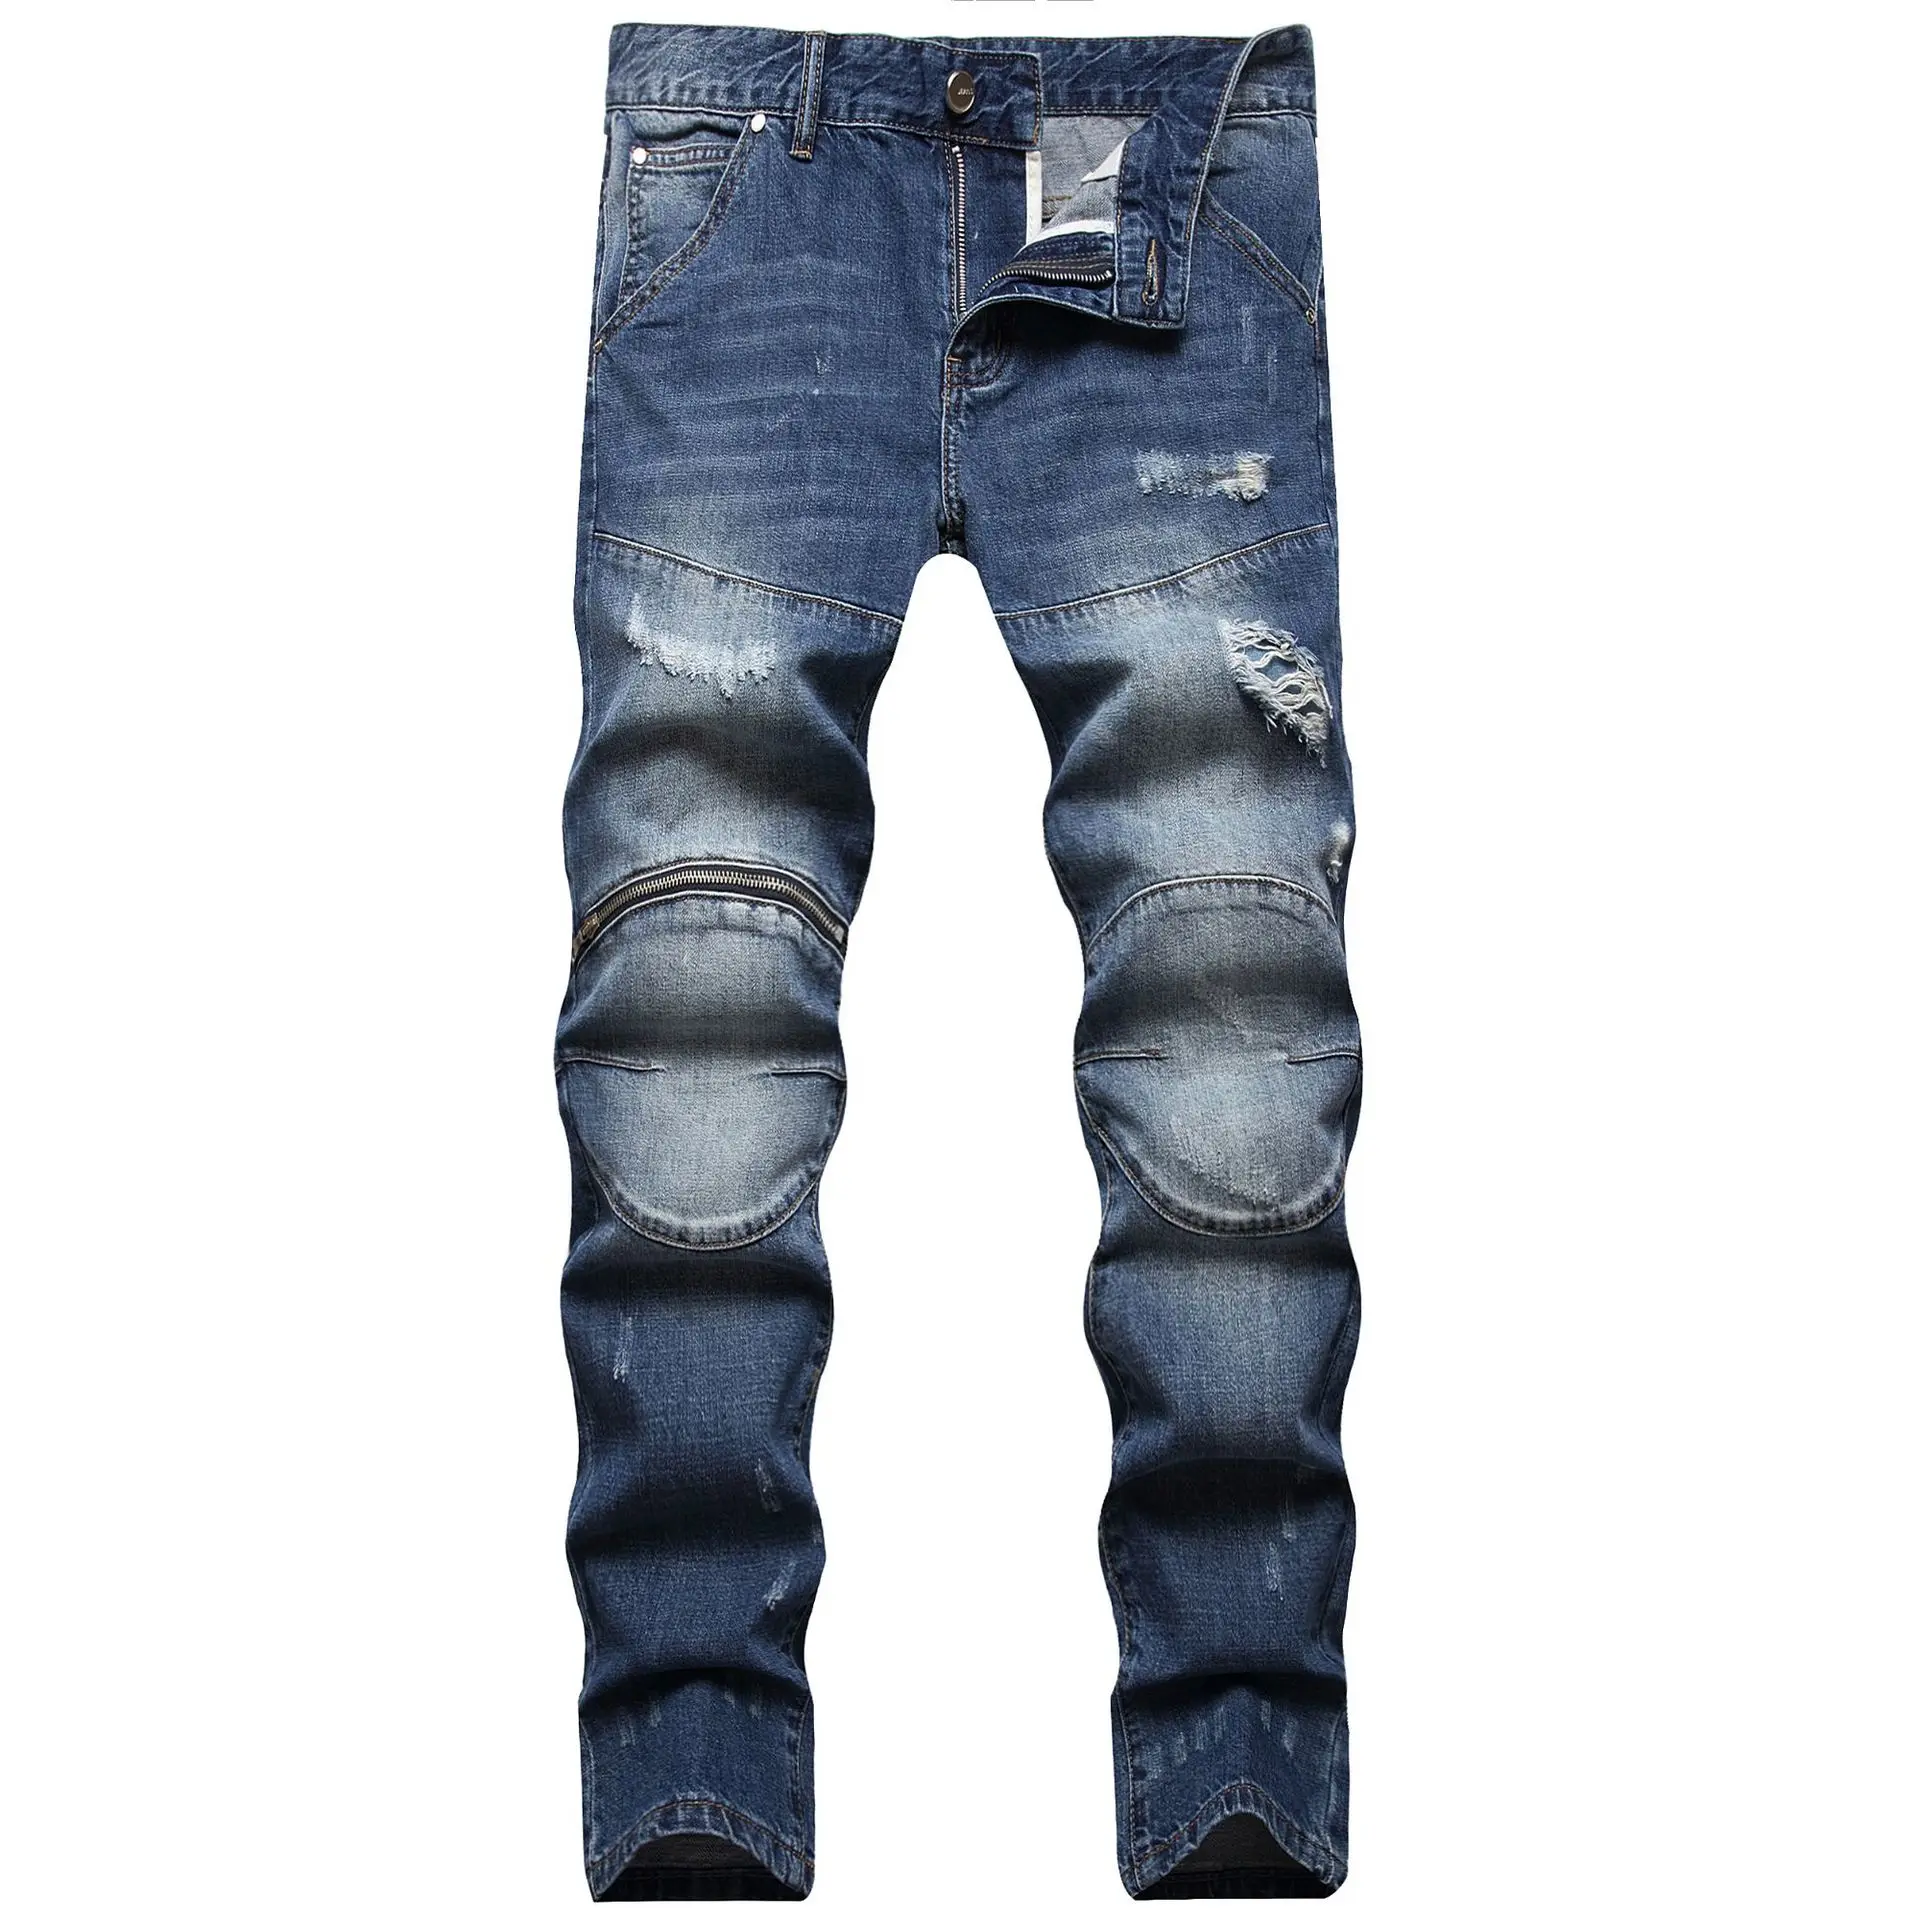 Fashion  New Classic Fashion High-End Vintage Patchwork Jeans Men's Casual Comfort High Quality Small Foot Pants